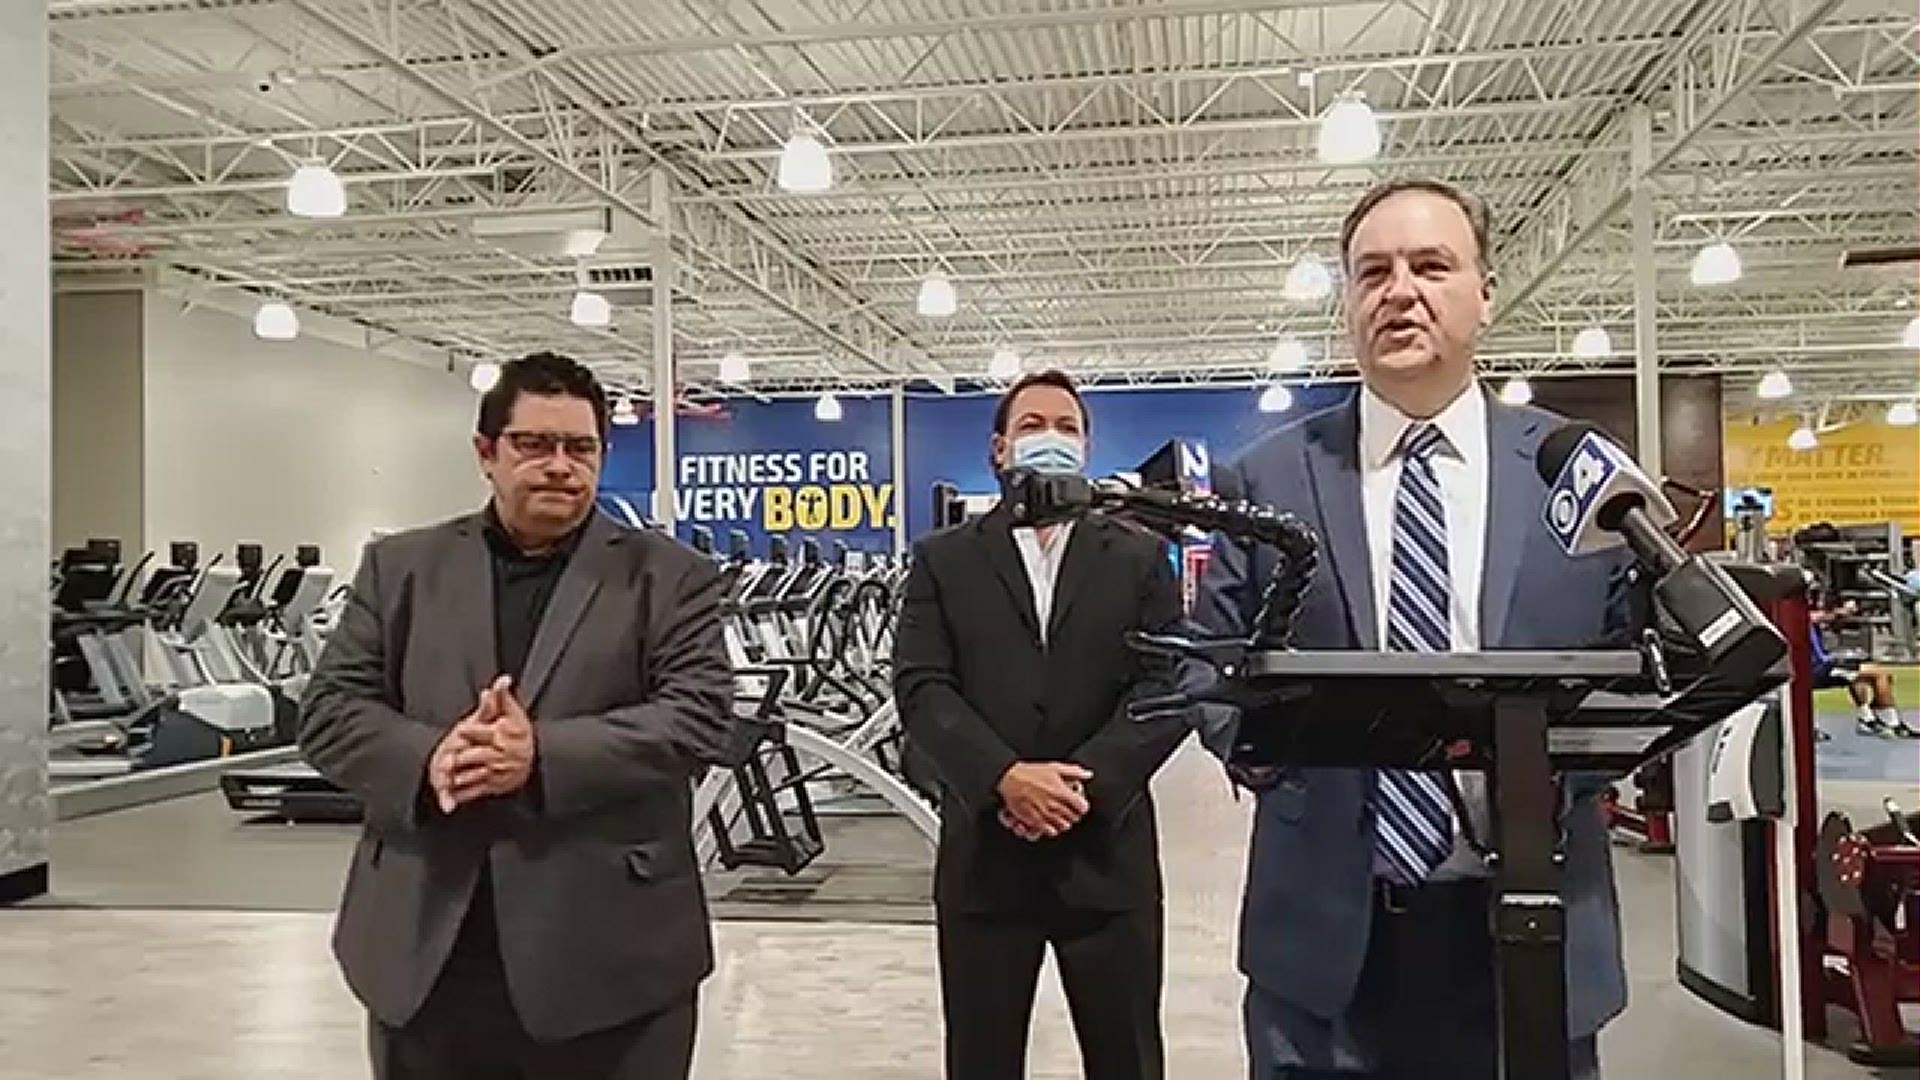 June 15 is the first day gyms and fitness centers can reopen in the county